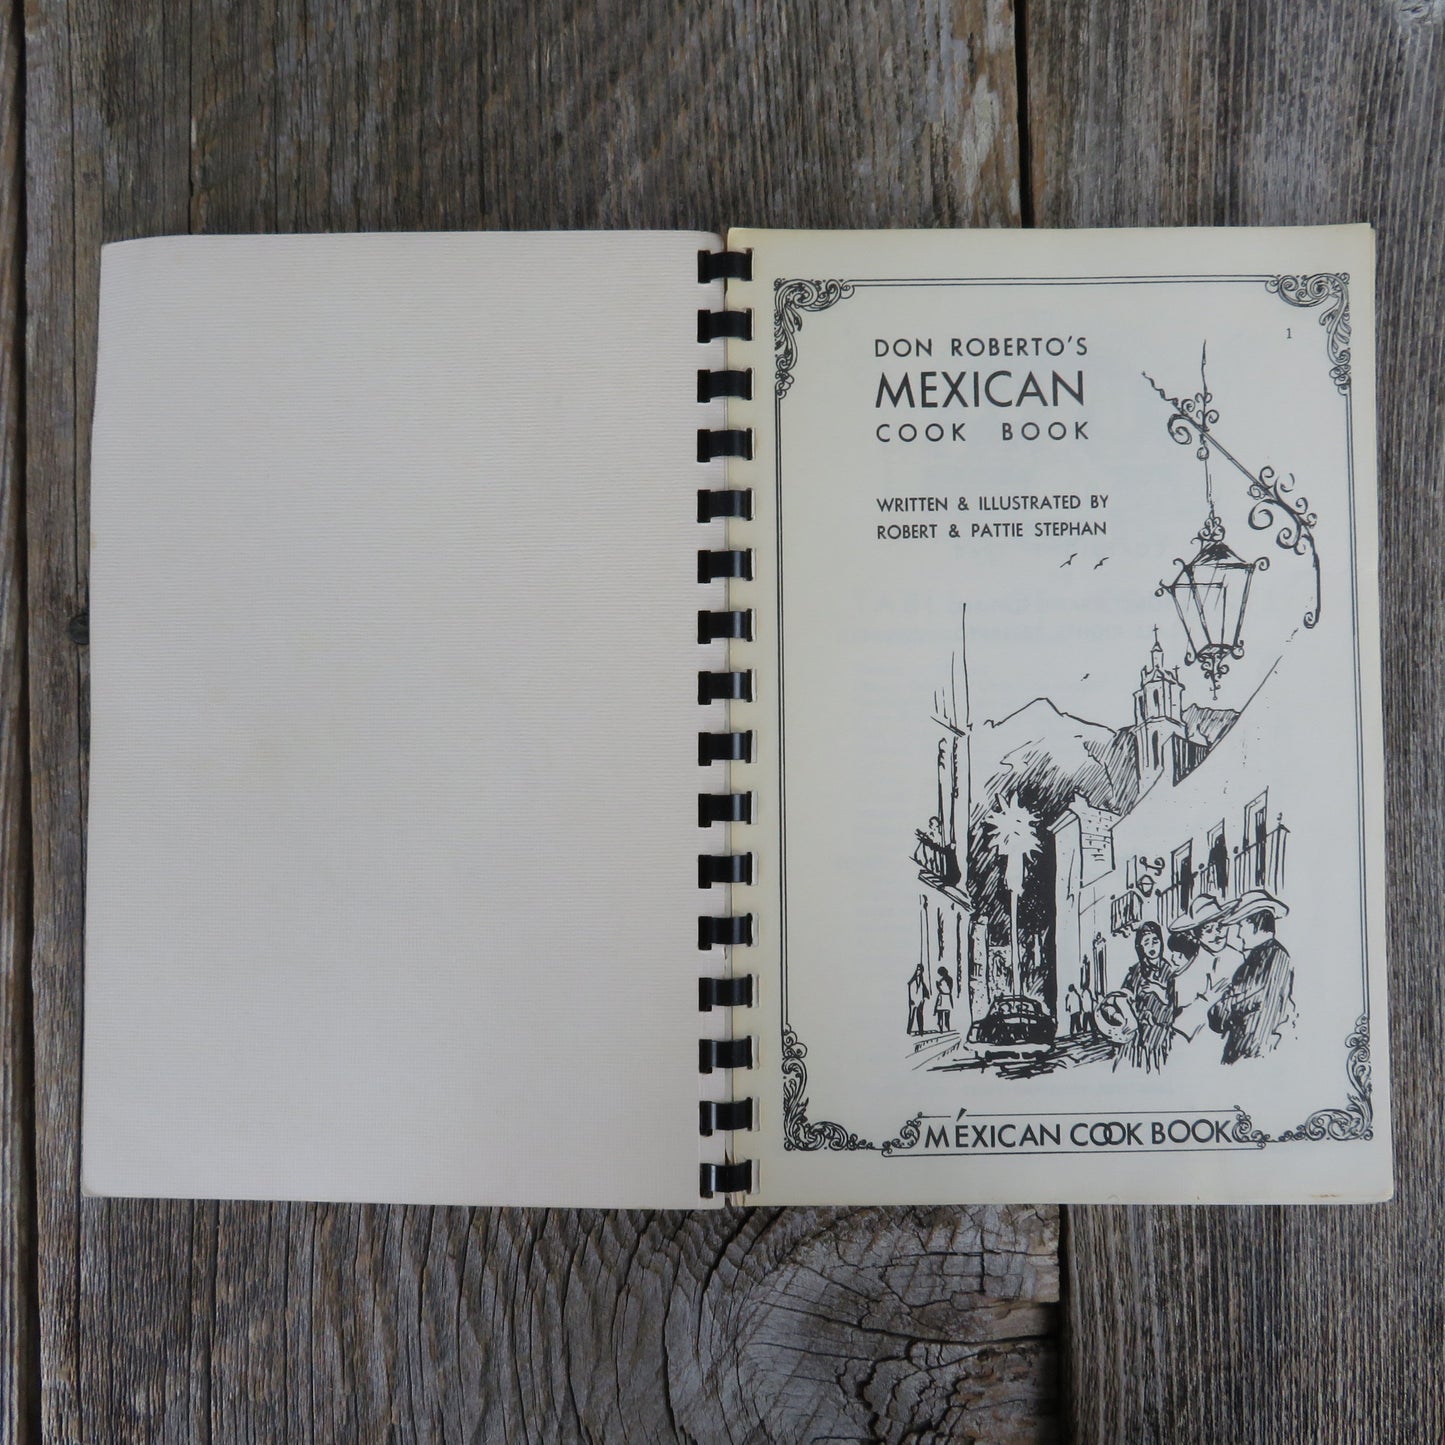 Vintage Cookbook Don Roberto's Mexican Cook Book Treasured Mexican Recipes by Robert & Pattie Stephan 1968 R. P. Publishing Co.